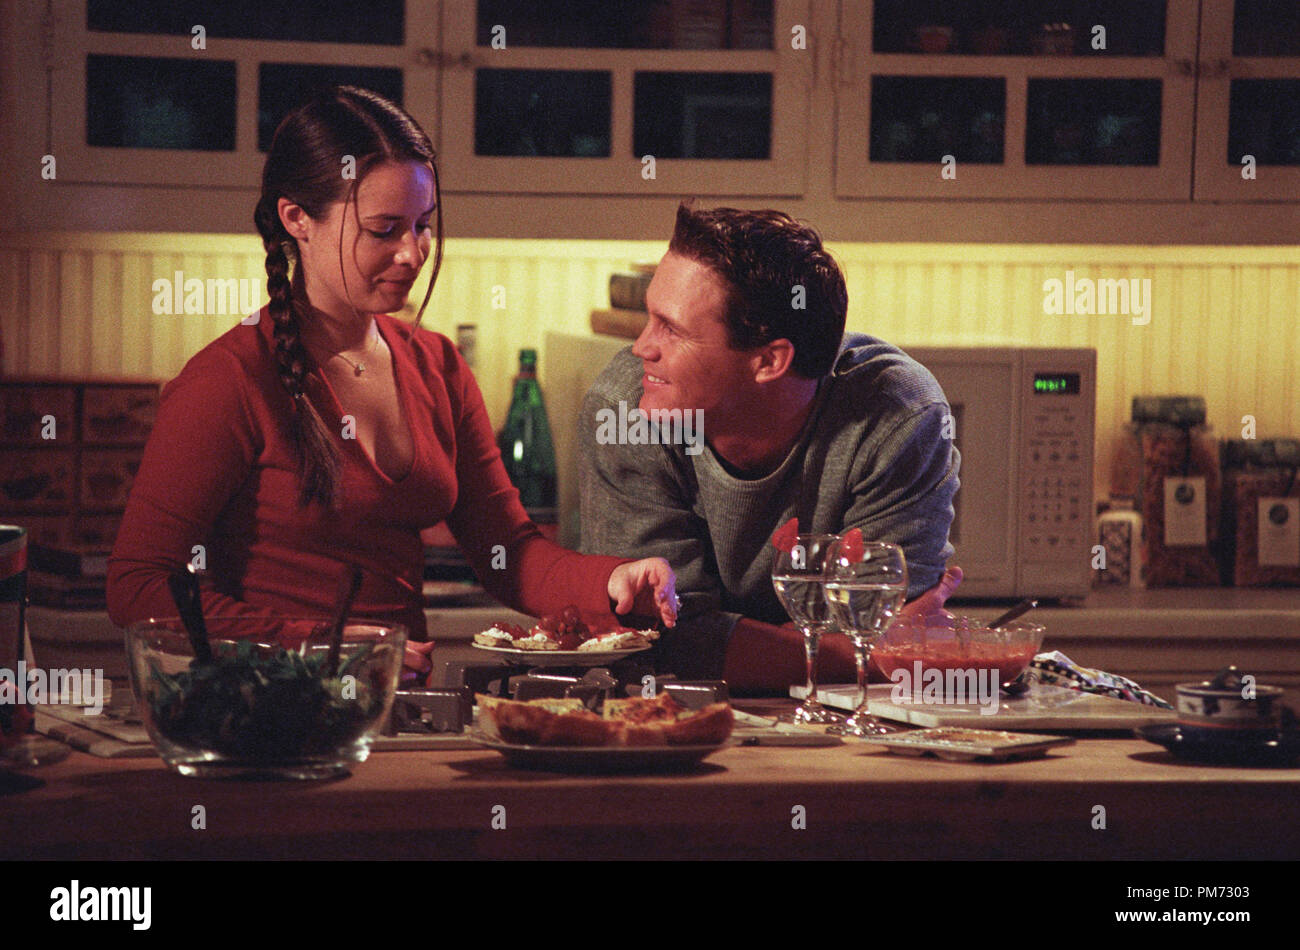 Film Still / Publicity Still from 'Charmed' (Episode: Muse to My Ears) Holly Marie Combs, Brian Krause 2001 Photo credit: Byron J. Cohen    File Reference # 308471229THA  For Editorial Use Only -  All Rights Reserved Stock Photo